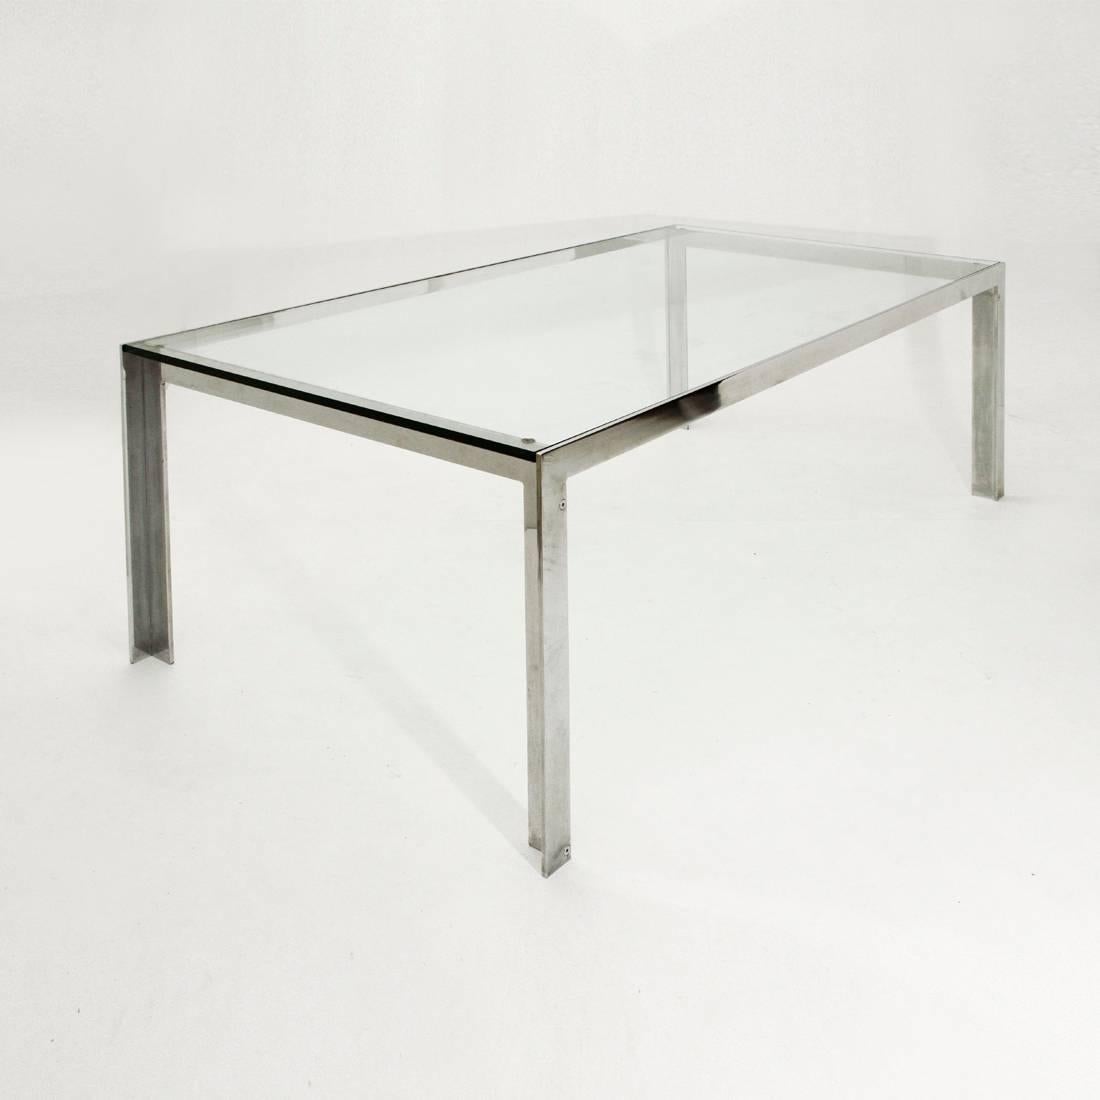 Italian Glass and Chrome Dining Table